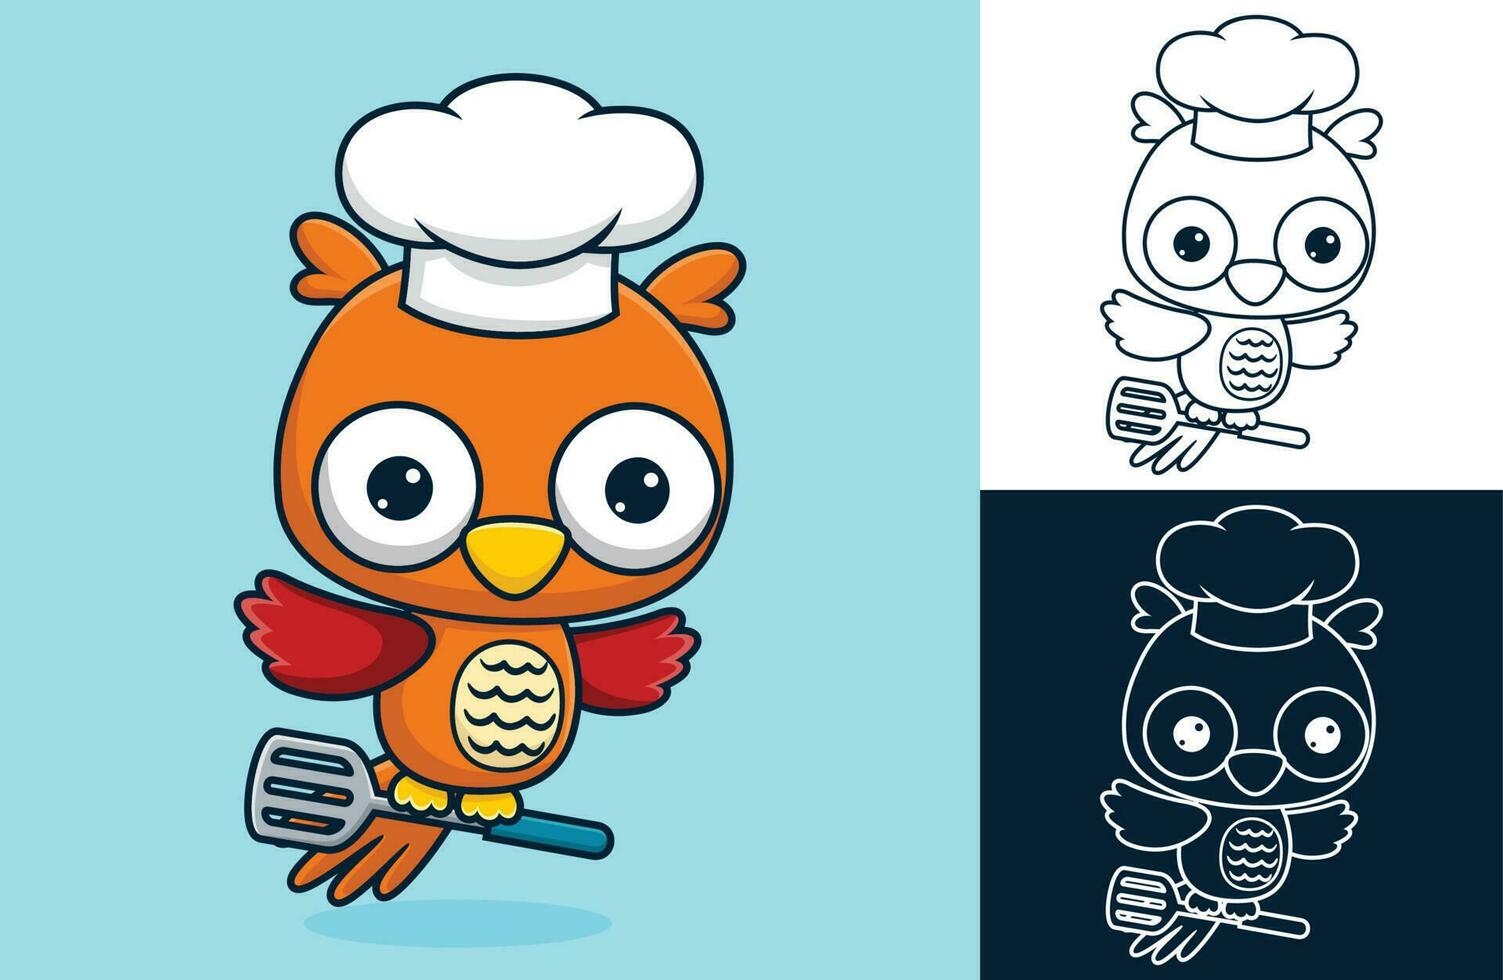 Cute owl wearing chef hat with spatula in its feet. Vector cartoon illustration in flat icon style